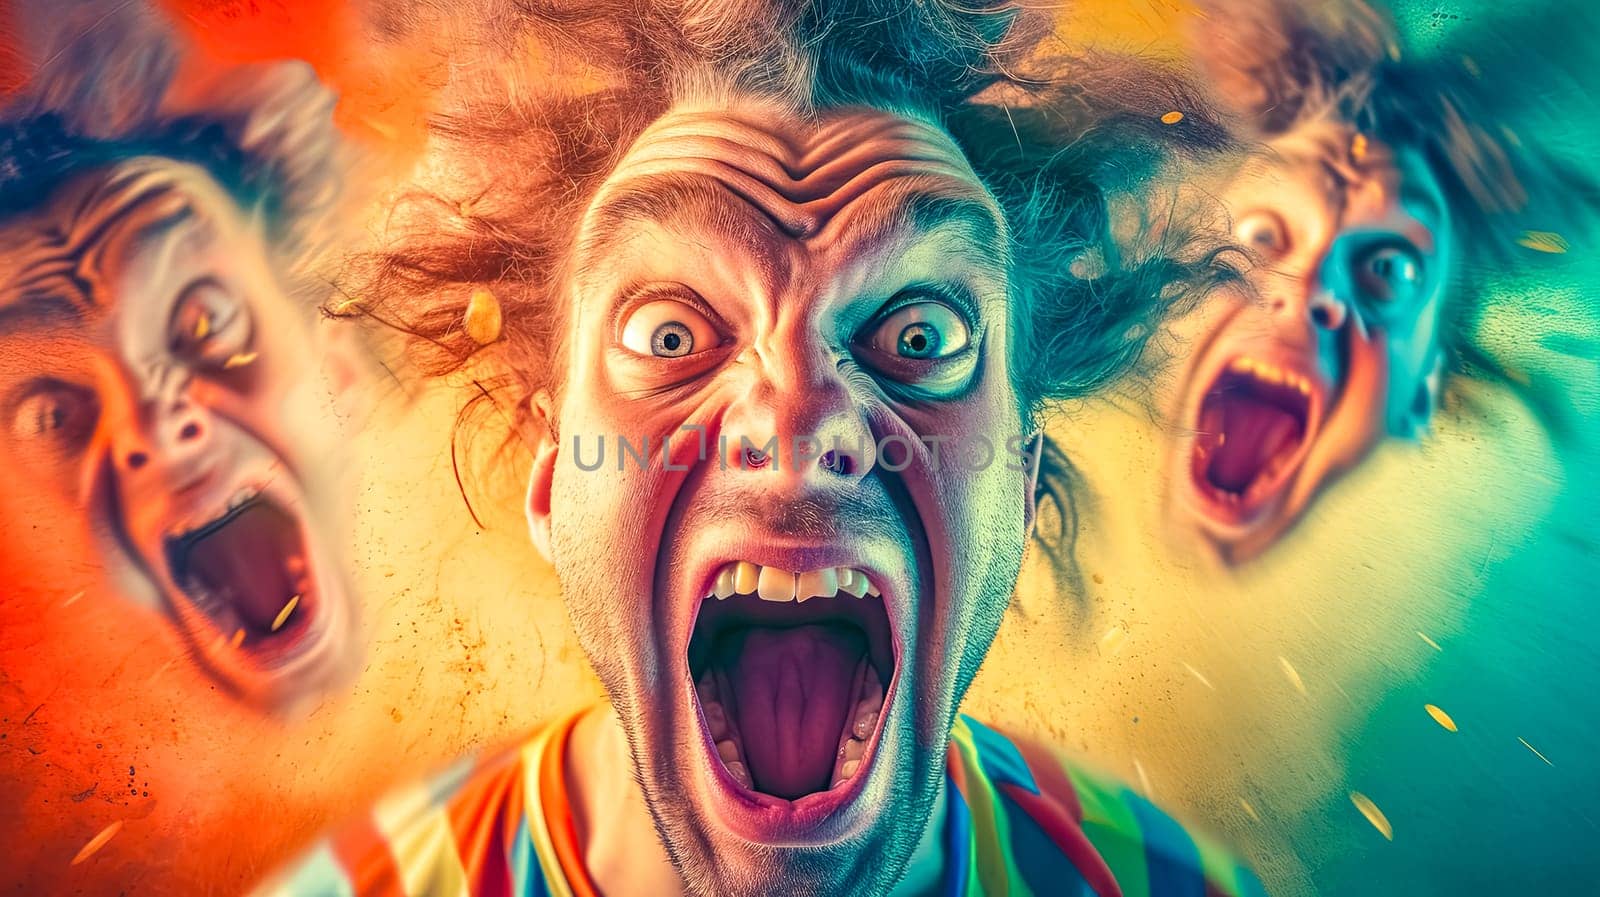 A surreal, colorful portrait of a person with exaggerated facial expressions, featuring multiple ghosted images conveying intense emotion, set against a vibrant, textured background.